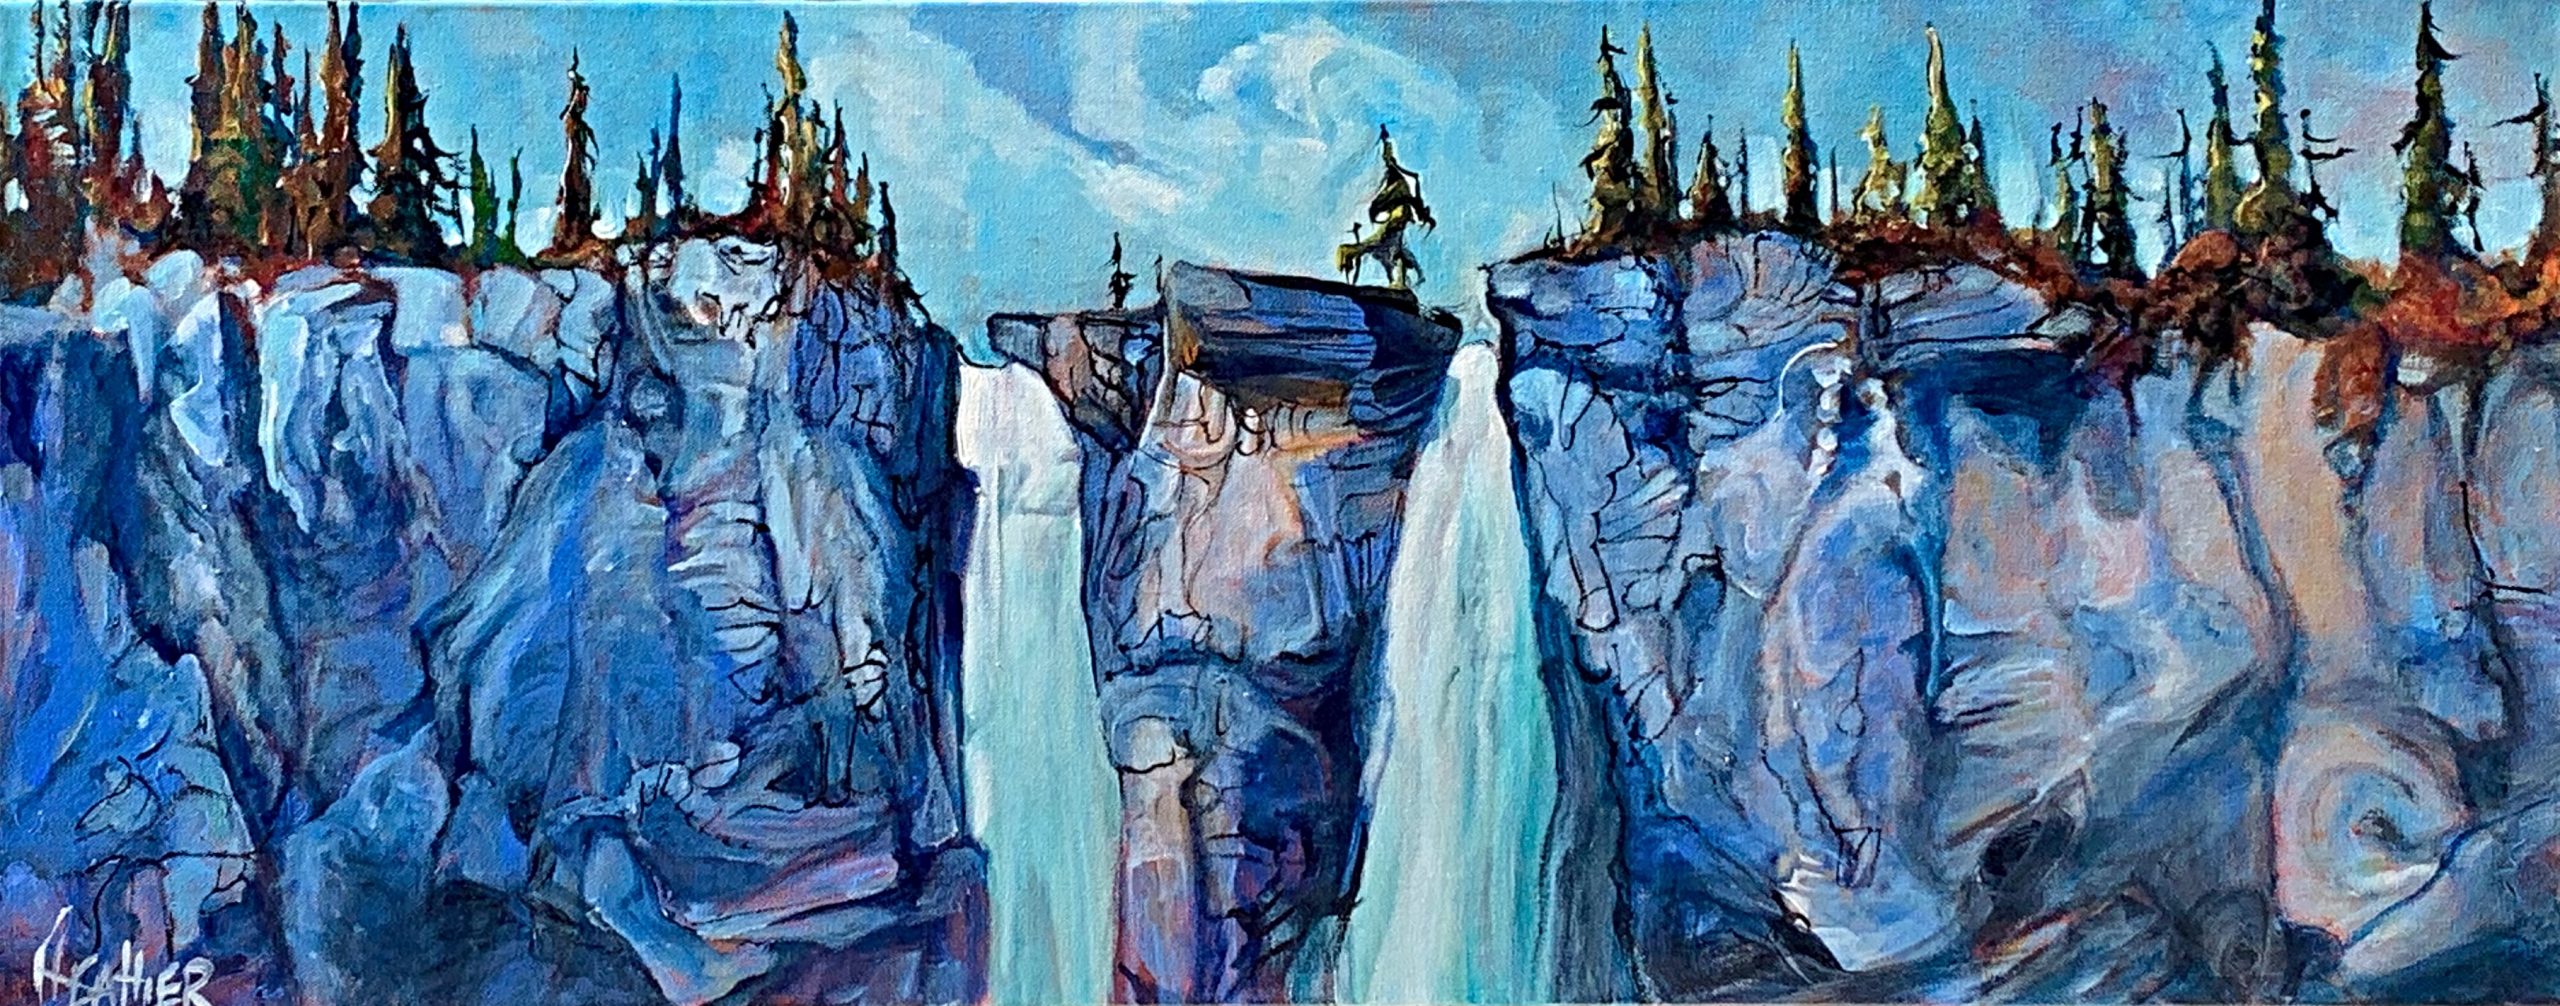 Top of Twin Falls, acrylic waterfall painting by Heather Pant | Effusion Art Gallery + Cast Glass Studio, Invermere BC